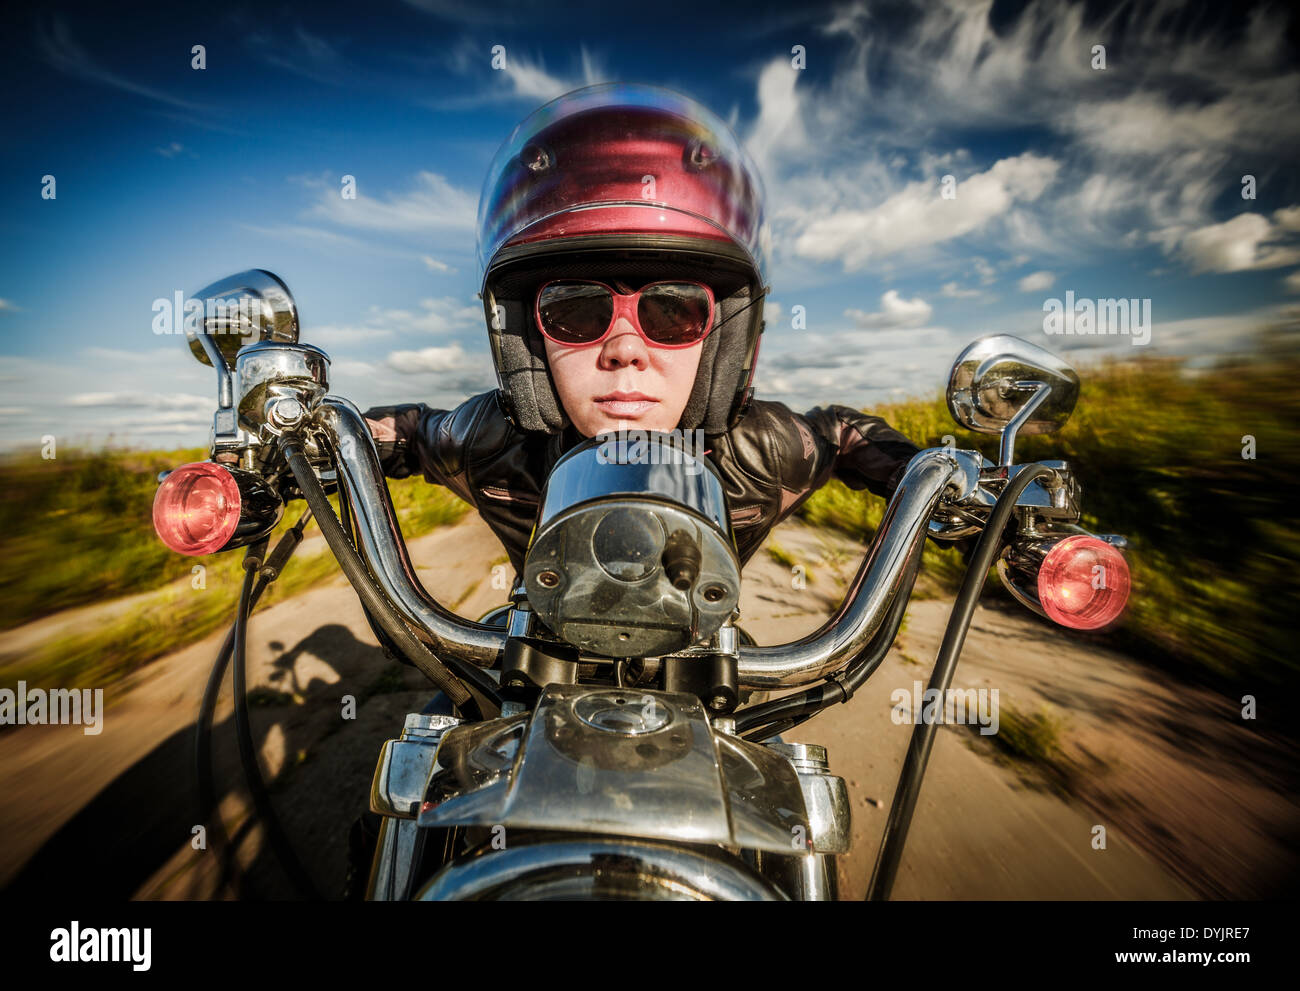 Funny Biker girl in sunglasses and leather jacket racing on the road (fisheye lens) Stock Photo